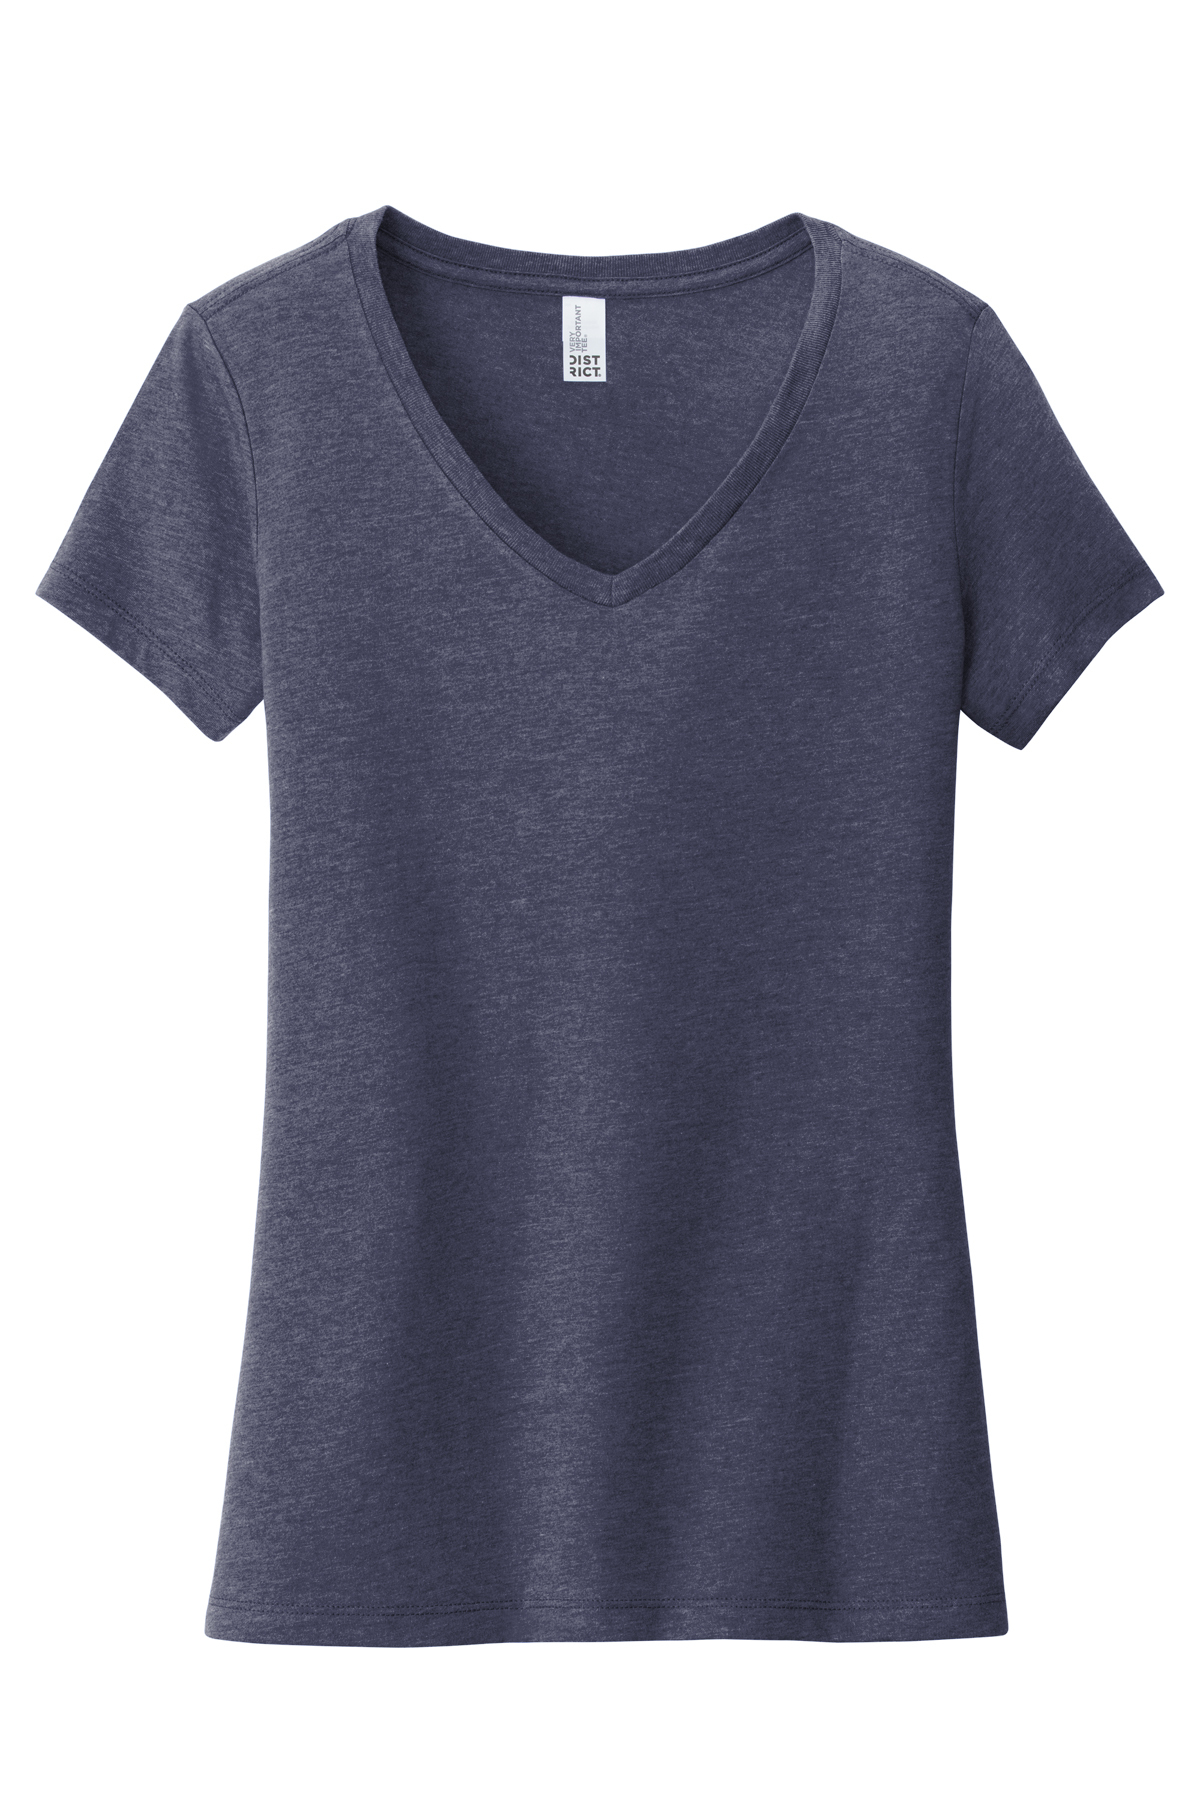 District Women’s Very Important Tee V-Neck | Product | SanMar